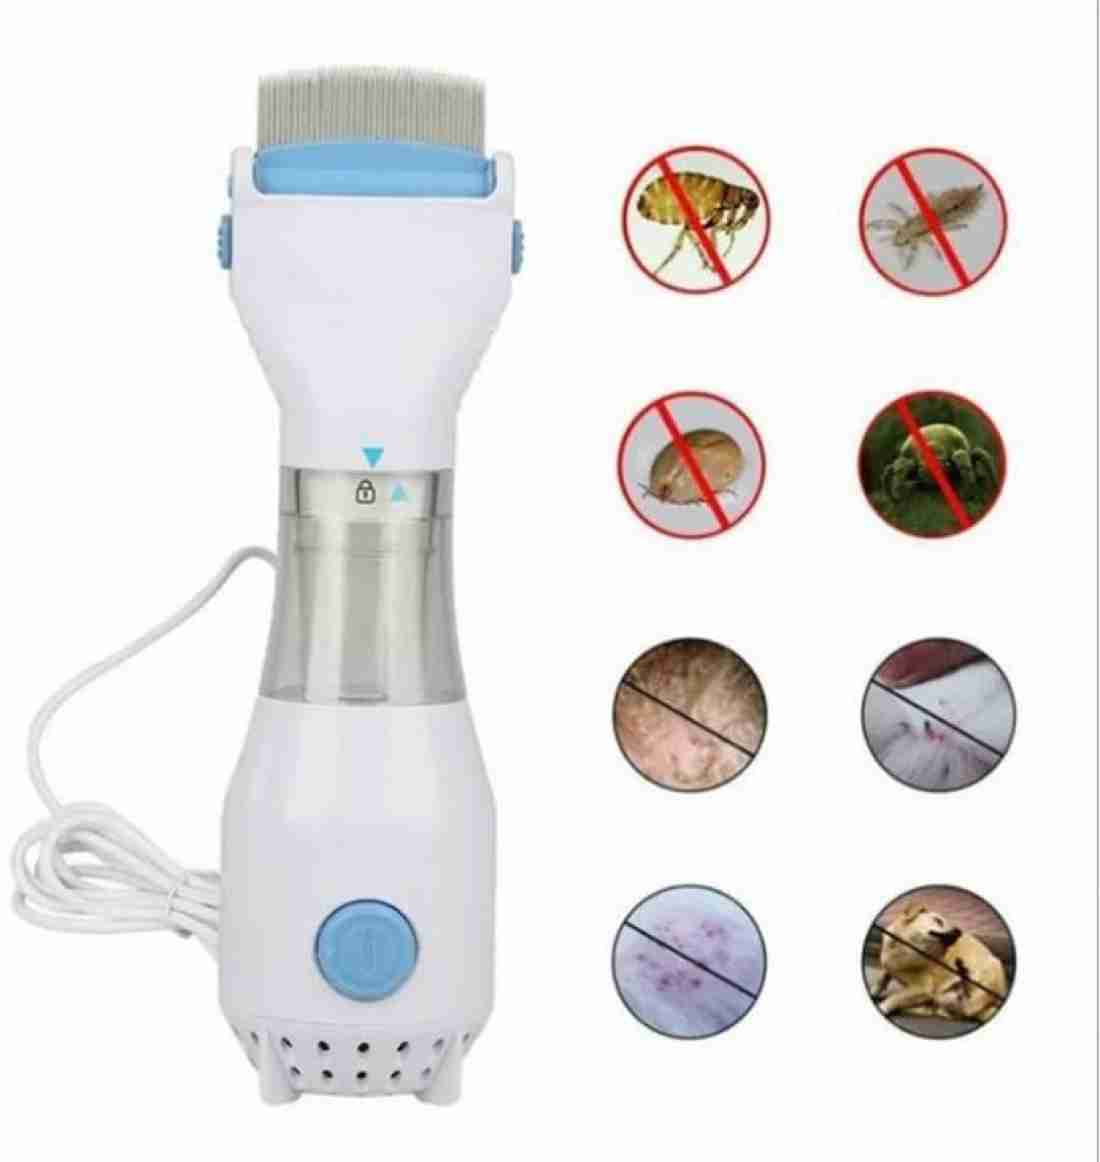 Dealnicy Chemical-Free Electric Head Lice Treatment Comb, V Comb - Price in  India, Buy Dealnicy Chemical-Free Electric Head Lice Treatment Comb, V Comb  Online In India, Reviews, Ratings & Features | Flipkart.com